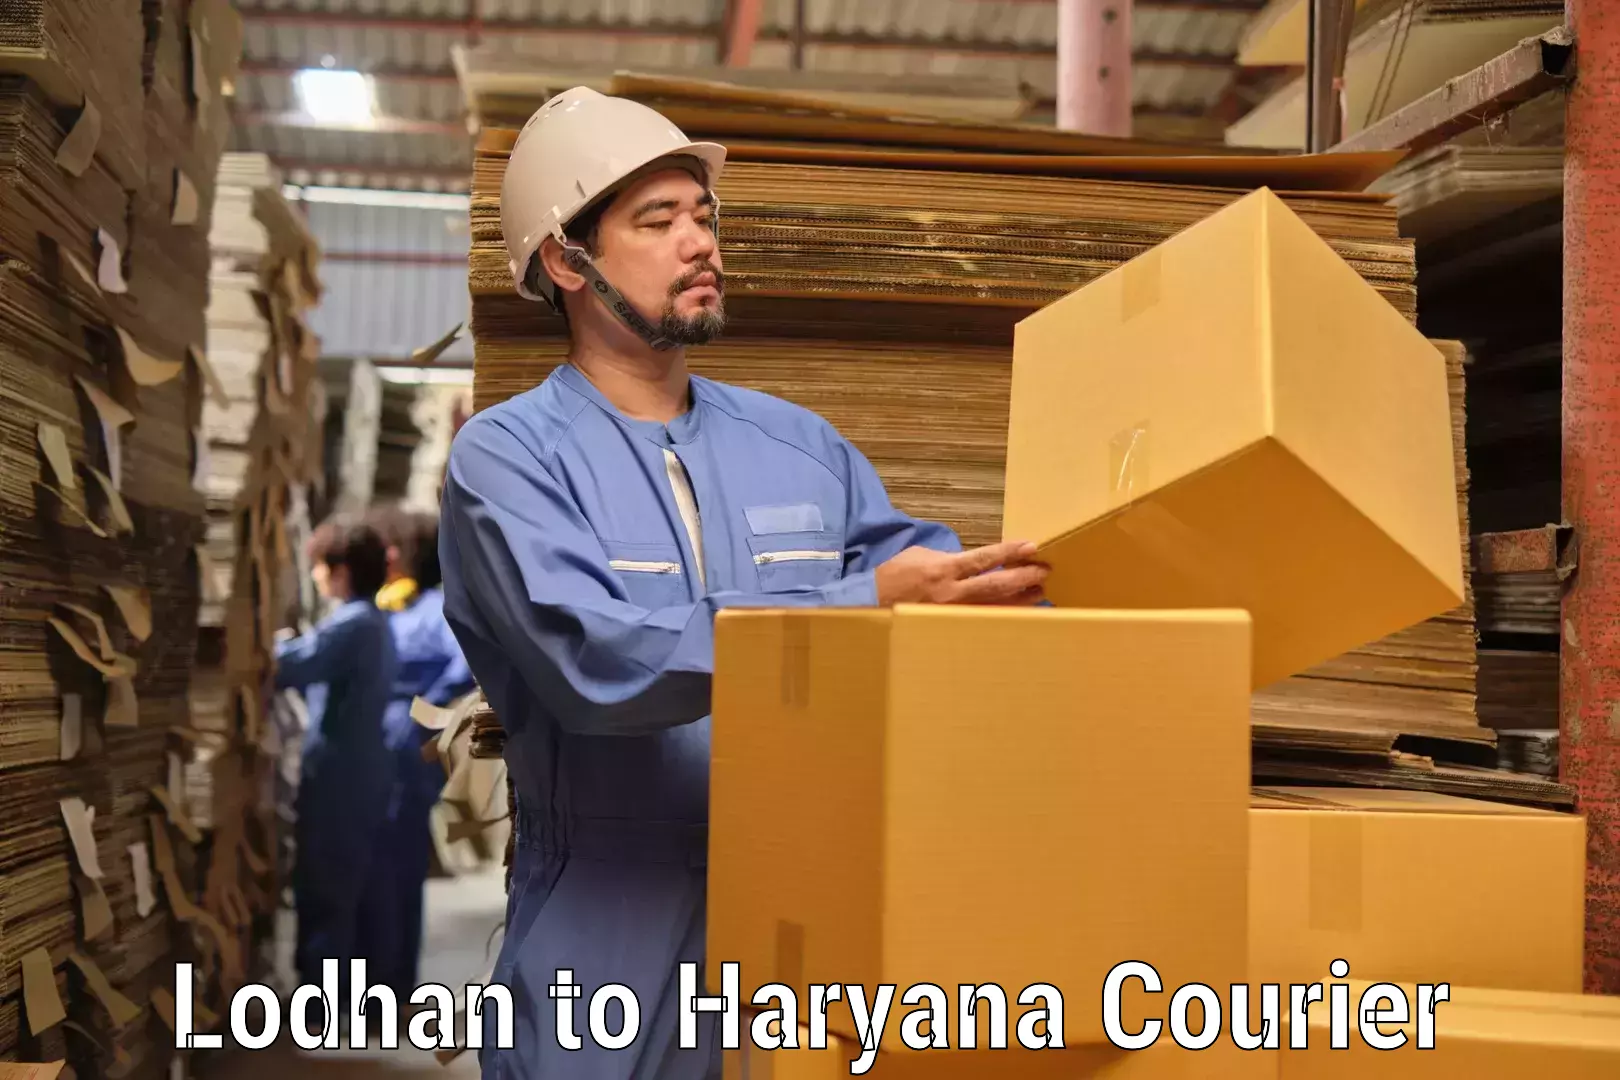 Residential courier service Lodhan to Haryana